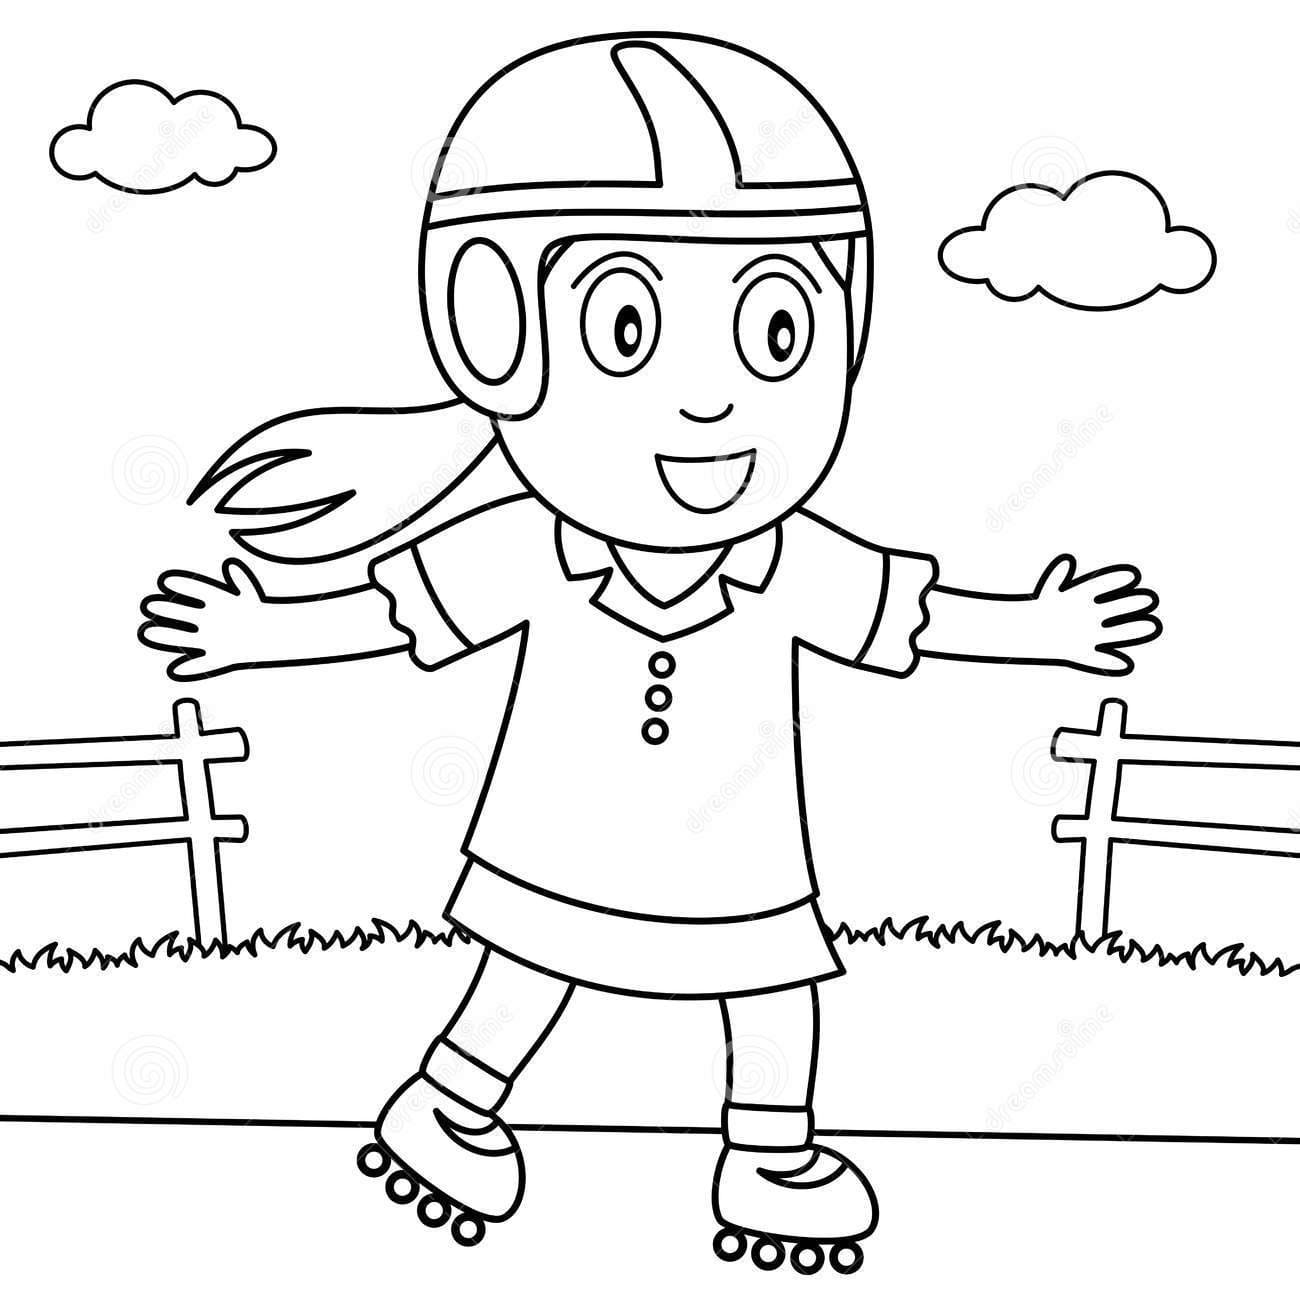 Coloring Girl With Rollerblade In The Park Coloring Page